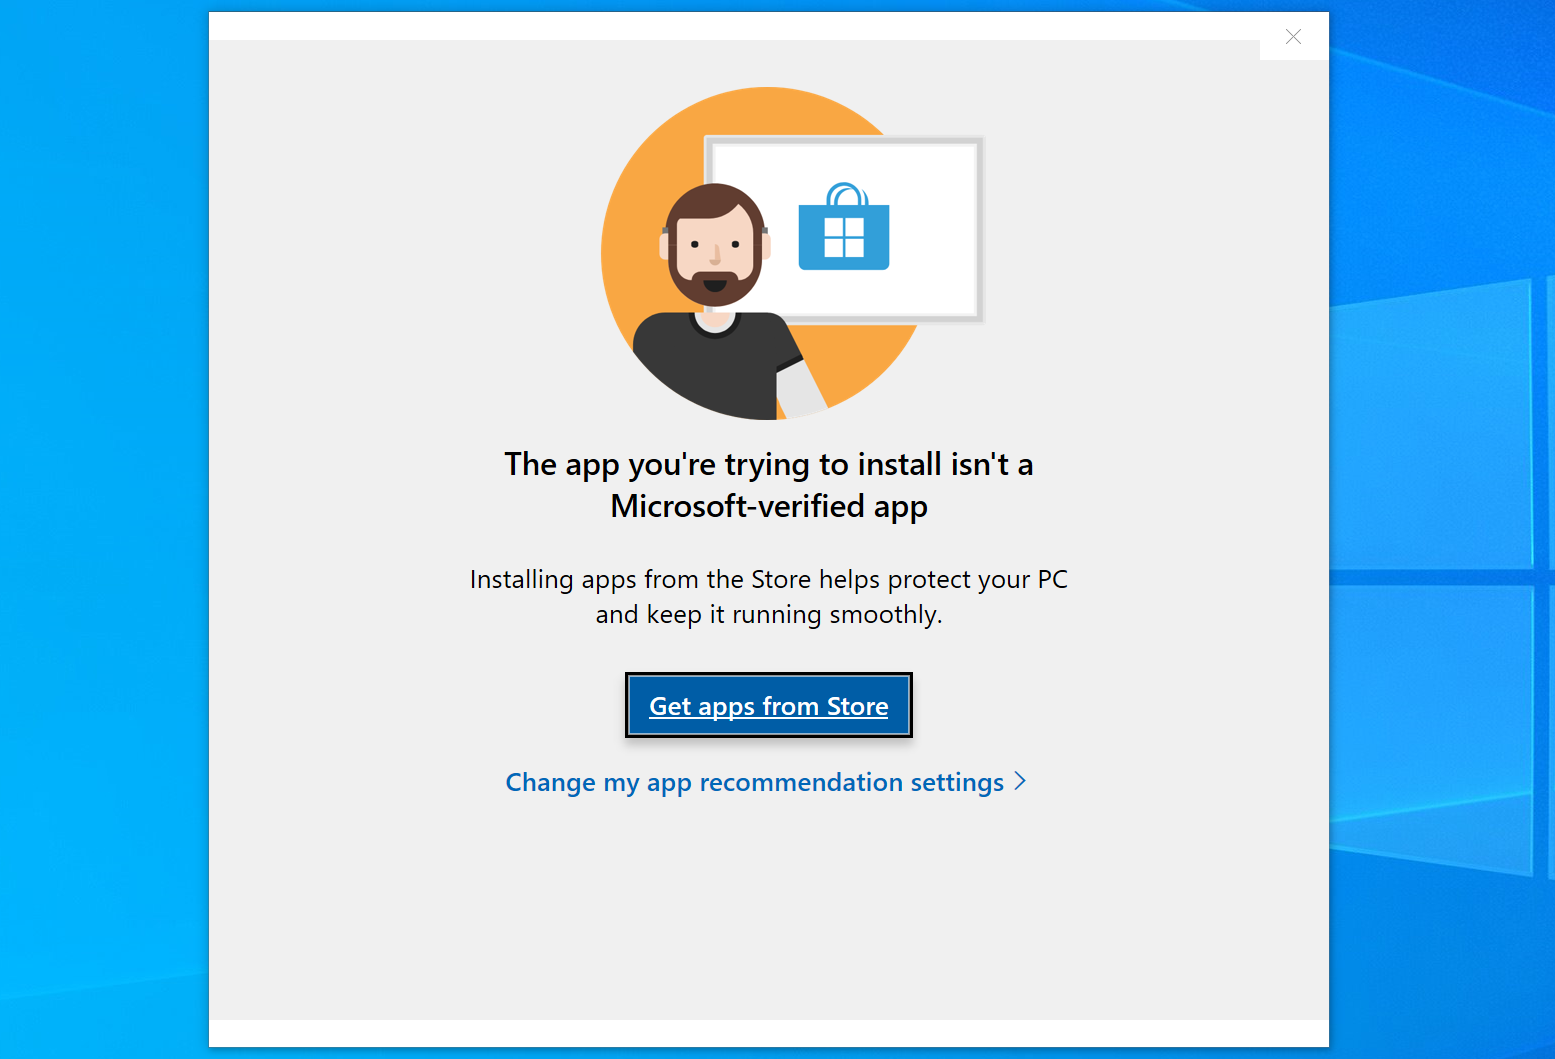 How to fix The app you're trying to install isn't a Microsoft-verified app on Windows app-trying-to-install-isnt-microsoft-verified.png